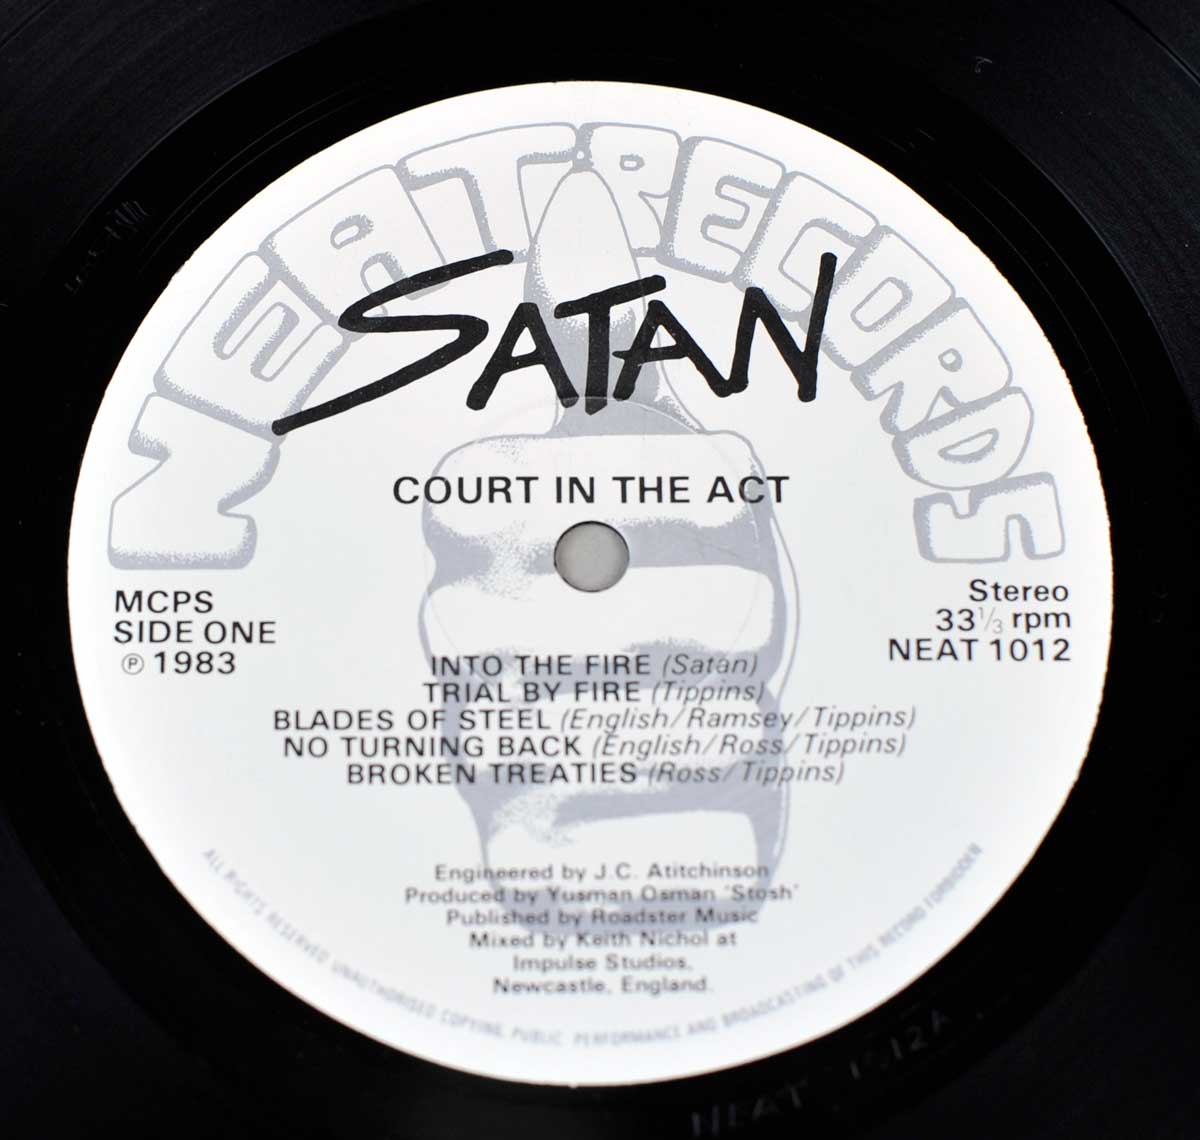 Enlarged High Resolution Photo of the Record's label SATAN Court in The Act  https://vinyl-records.nl